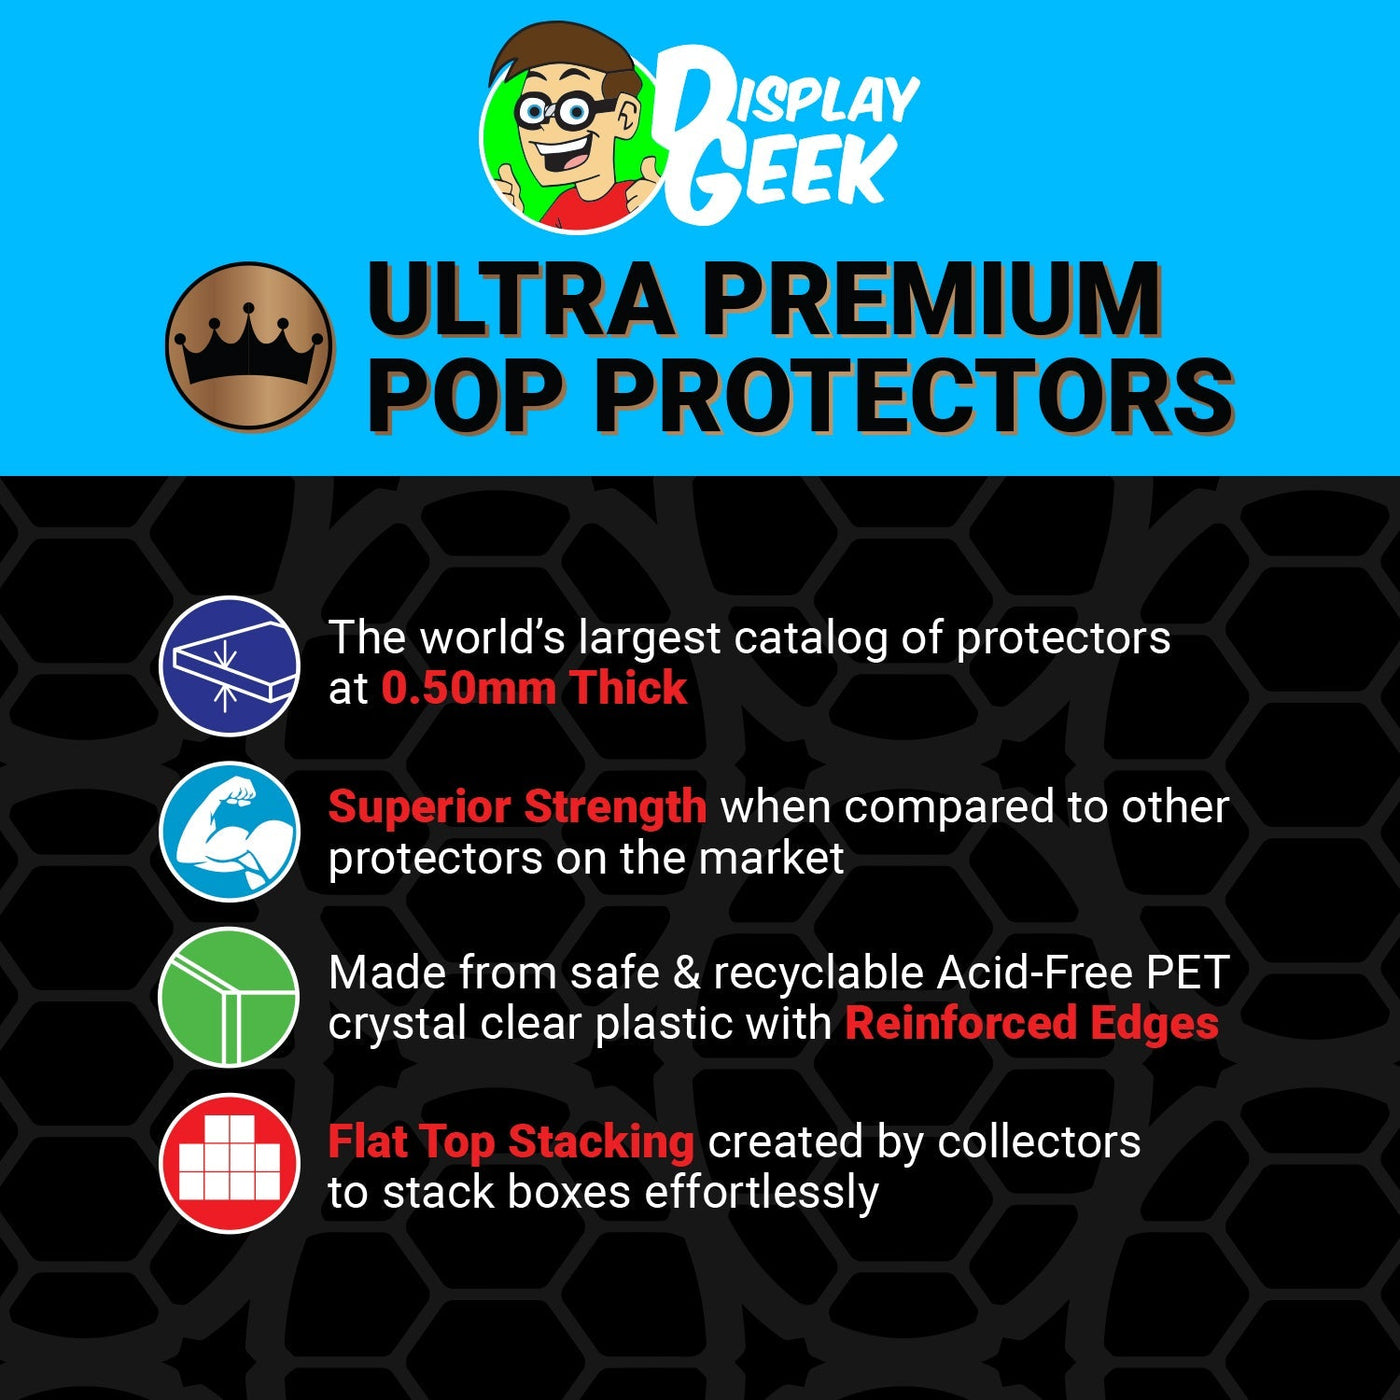 Pop Protector for Betty Boop Chase Black & White Funko Pop Pez on The Protector Guide App by Display Geek